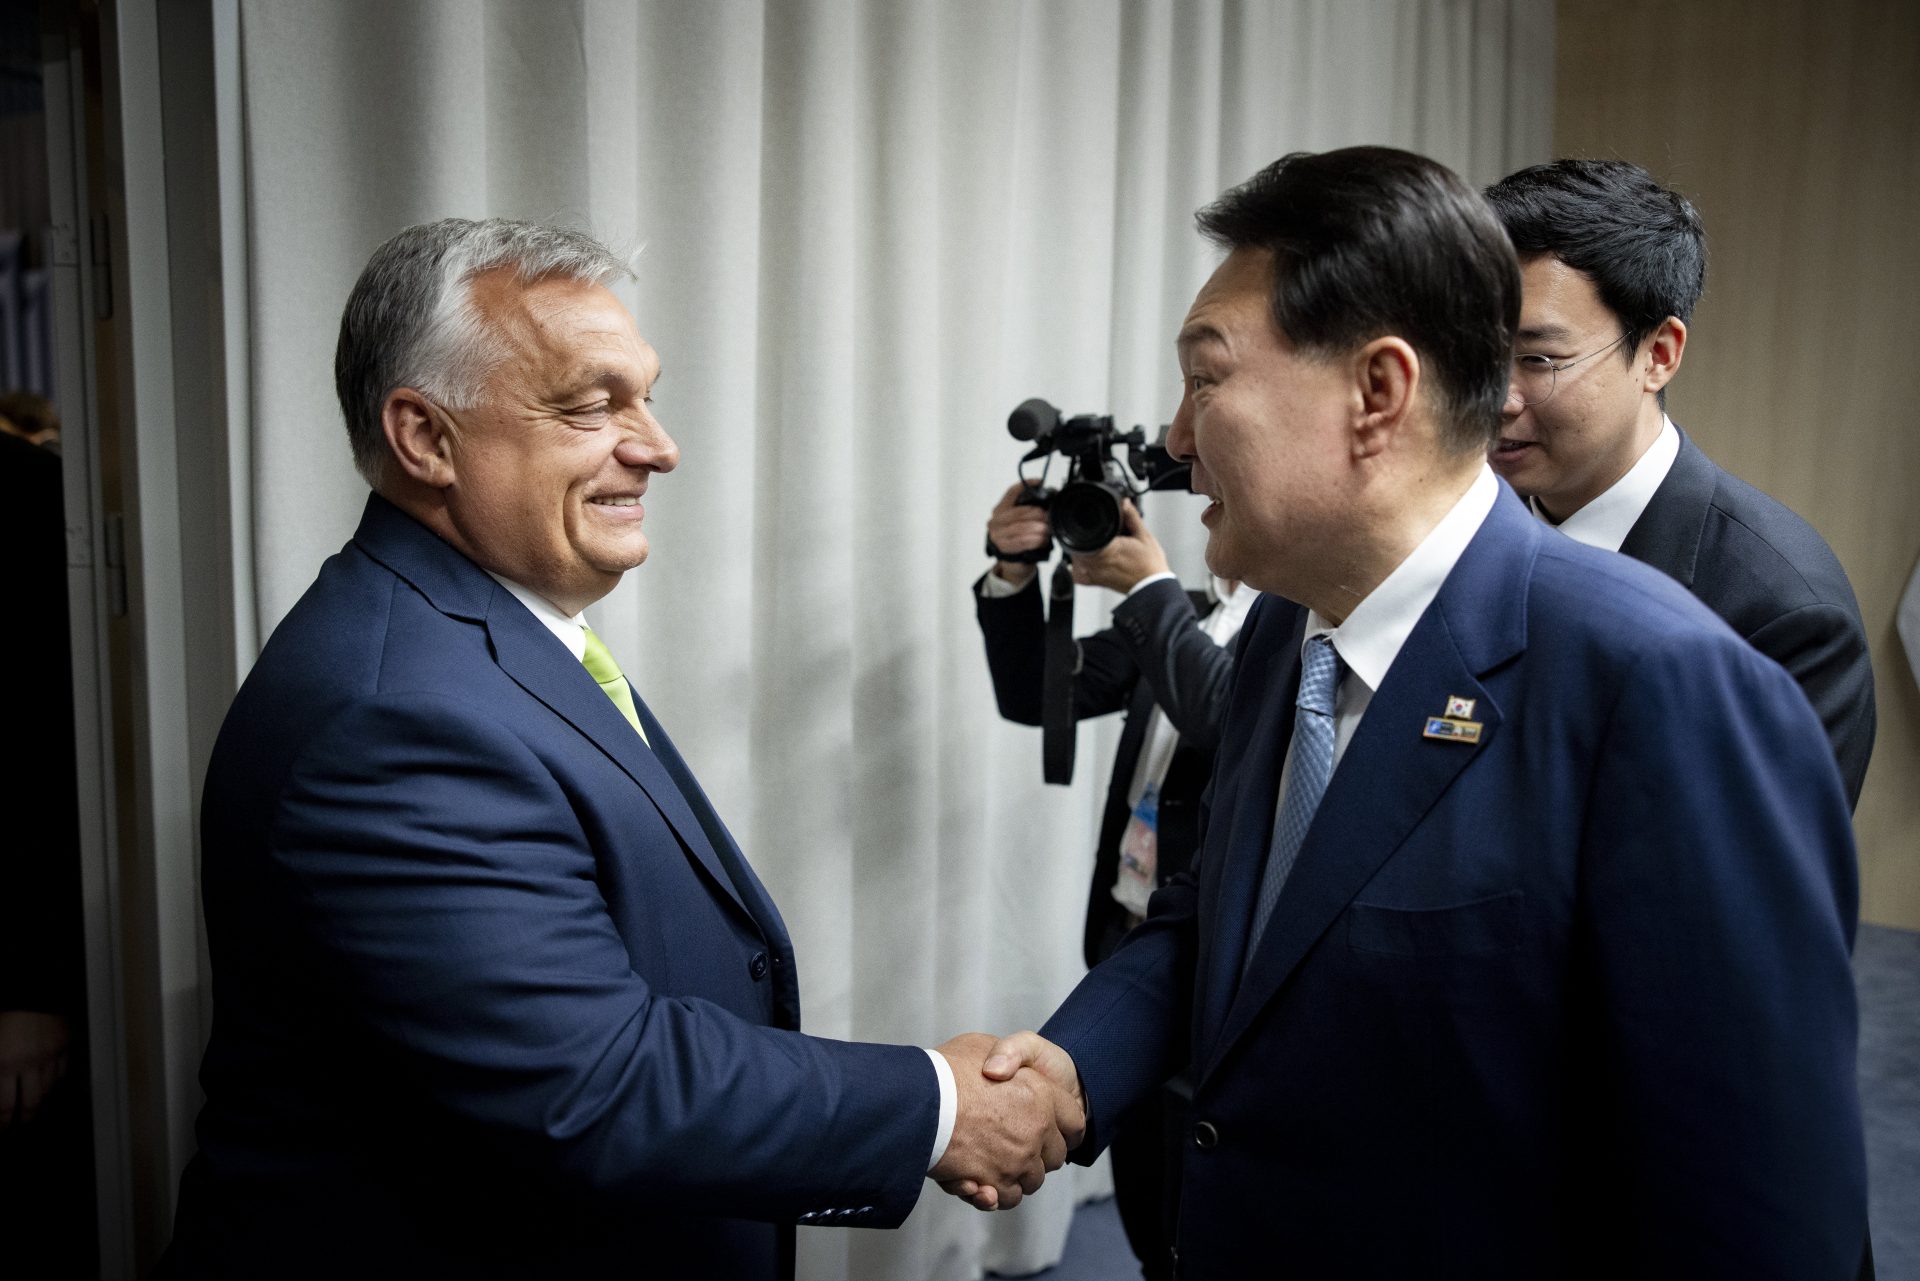 “Deep-Rooted” Relations: South Korea is One of Biggest Foreign Investors in Hungary Over Recent Years